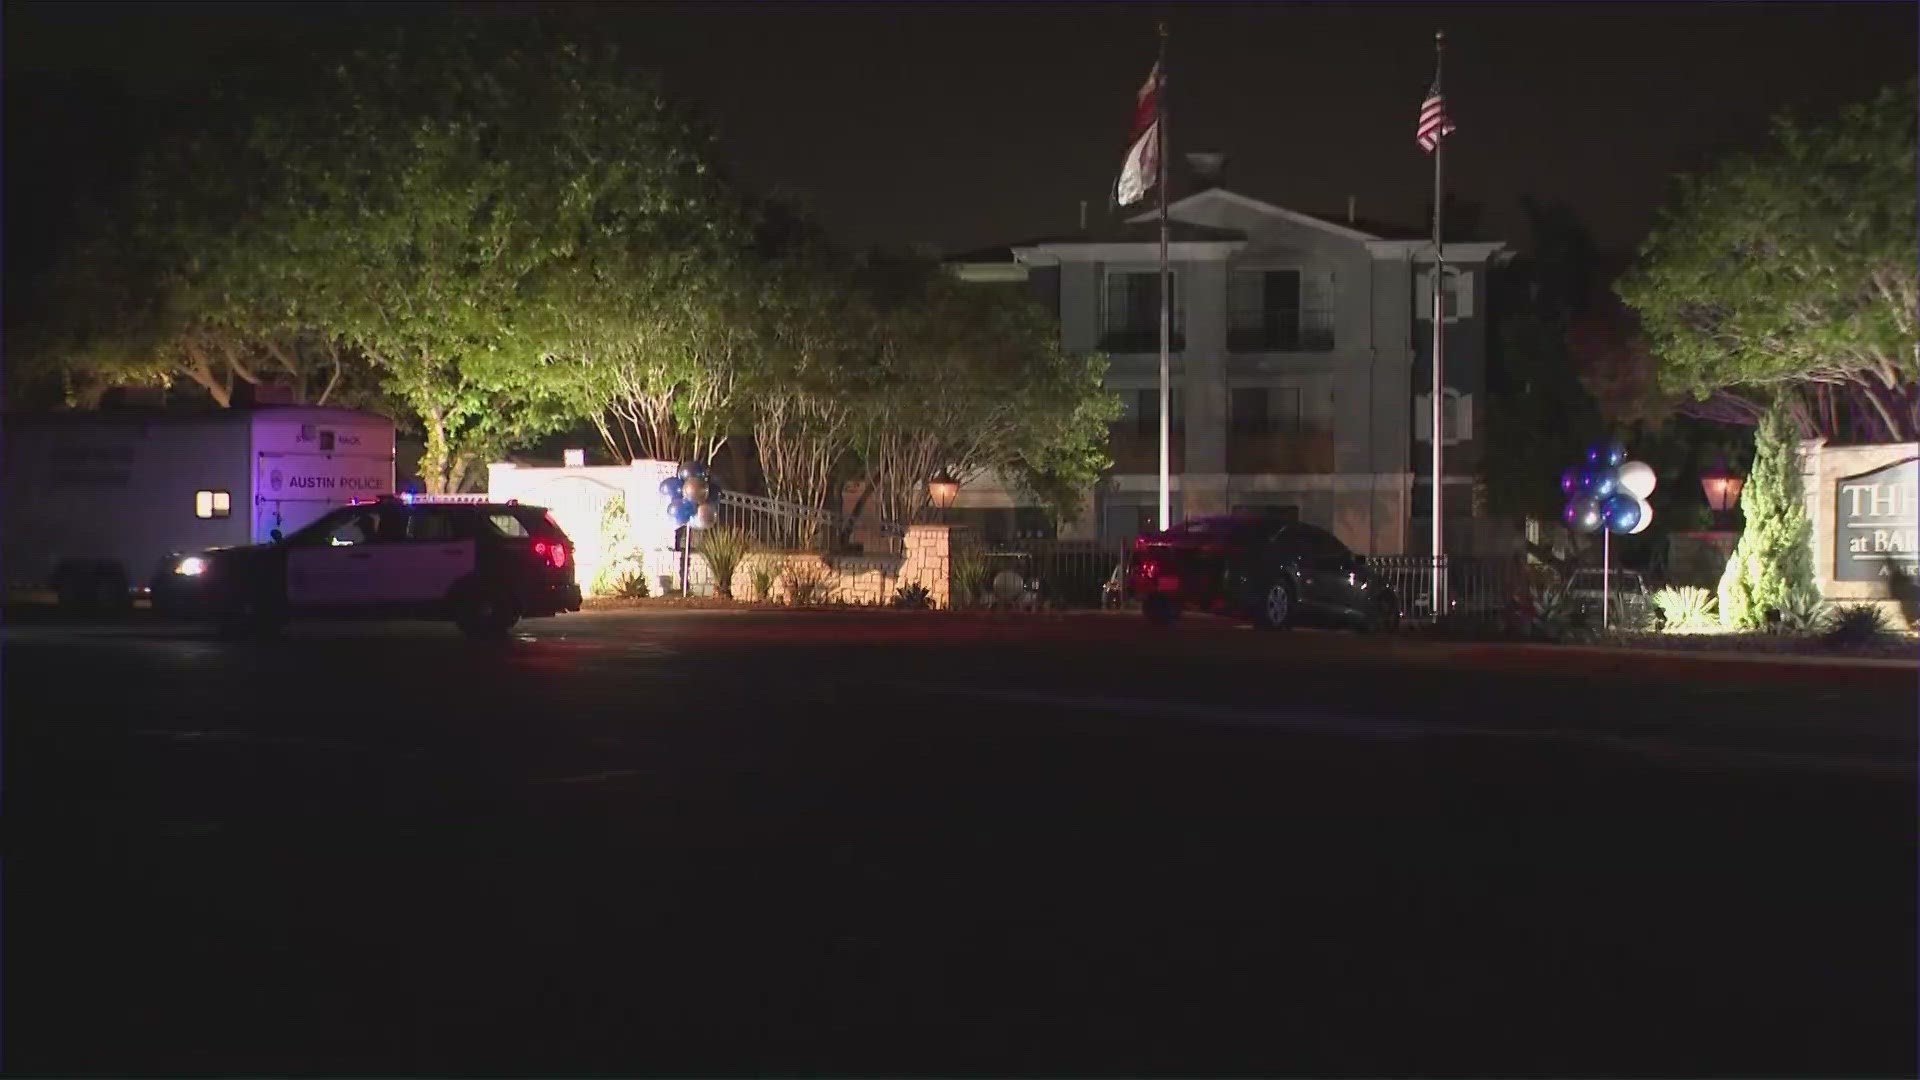 The shooting happened at around 2 a.m. on April 6 at an apartment complex on Tamarron Boulevard.